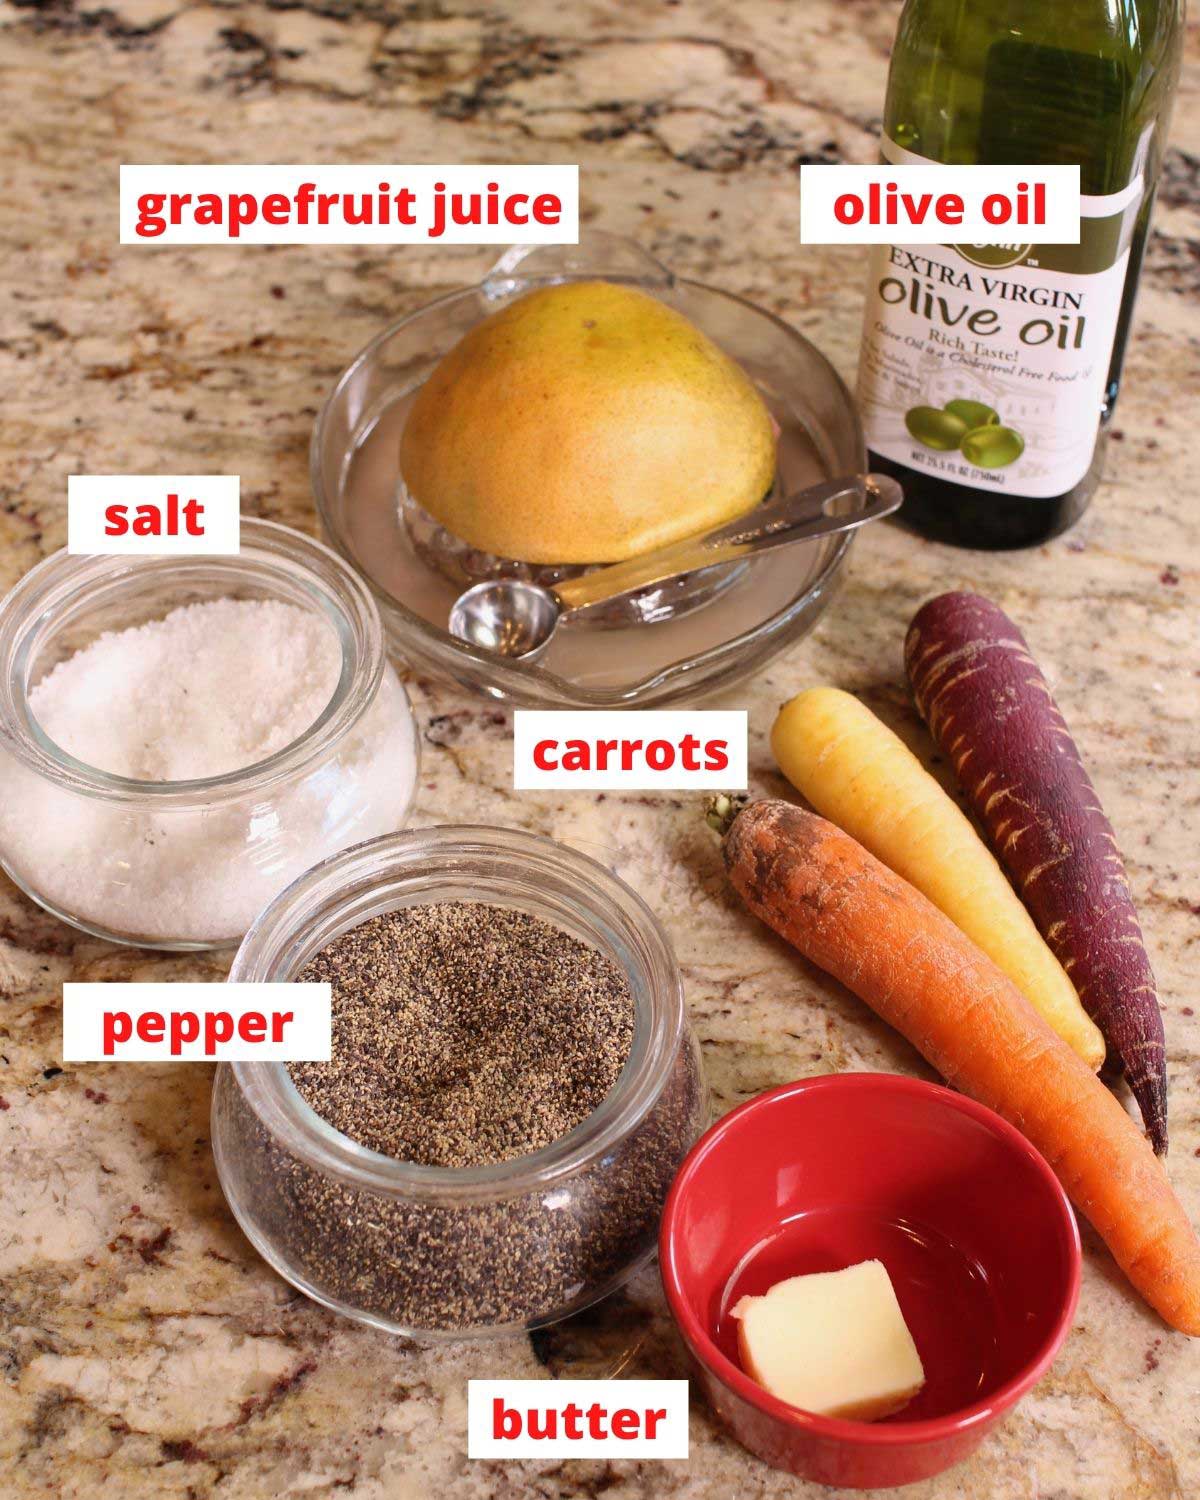 carrots, butter, salt, pepper, and juice on a brown countertop.